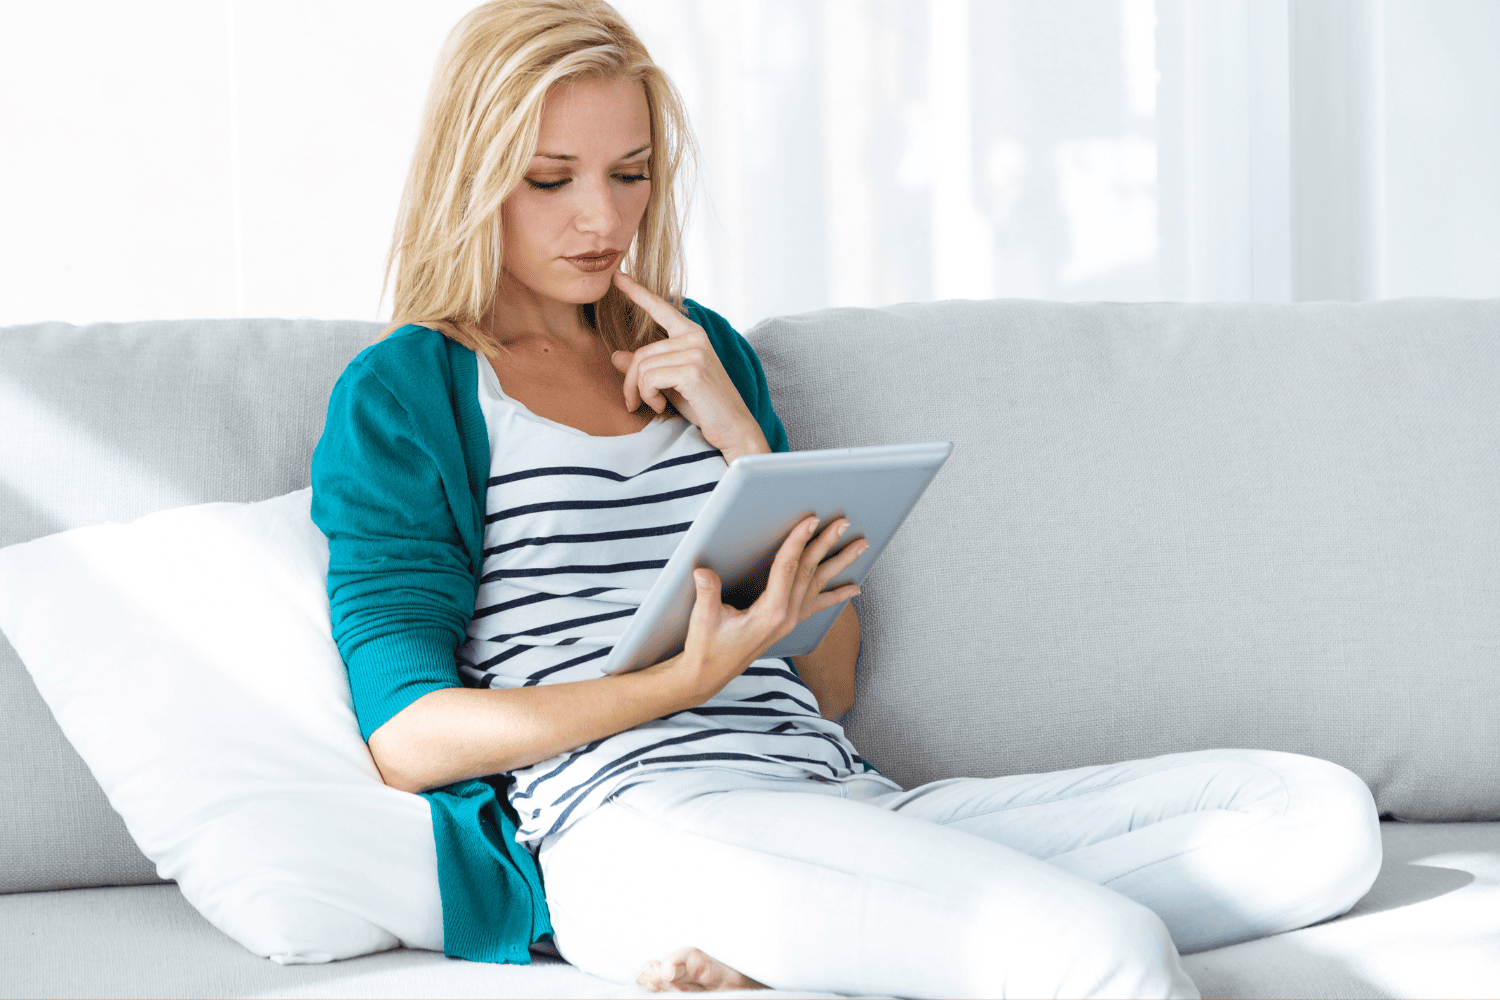 Woman sits on couch looking at tablet